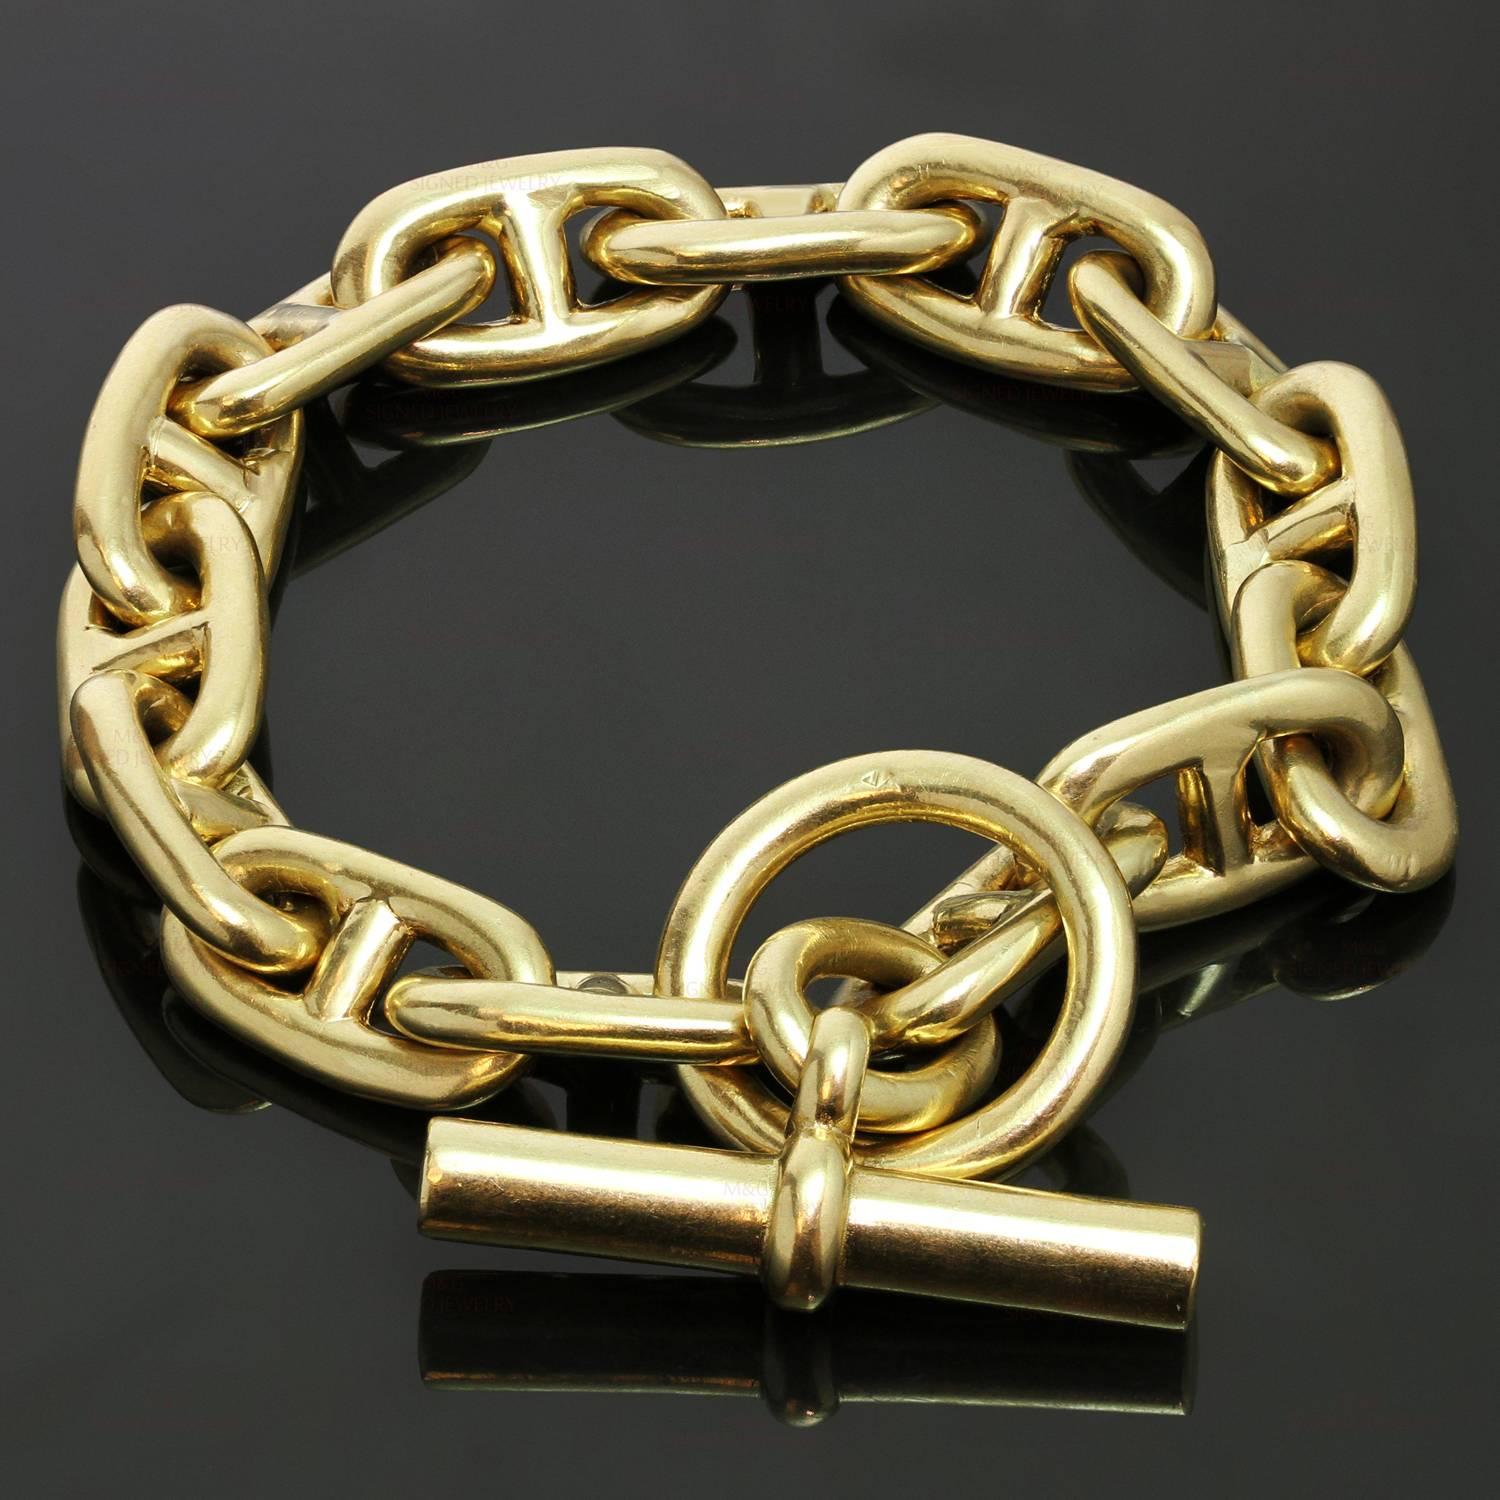 This vintage Hermes bracelet from the iconic Chaîne d'Ancre collection is crafted in 18k yellow gold and signed Hermes Paris. Made in France circa 1980s. Measurements: 0.43